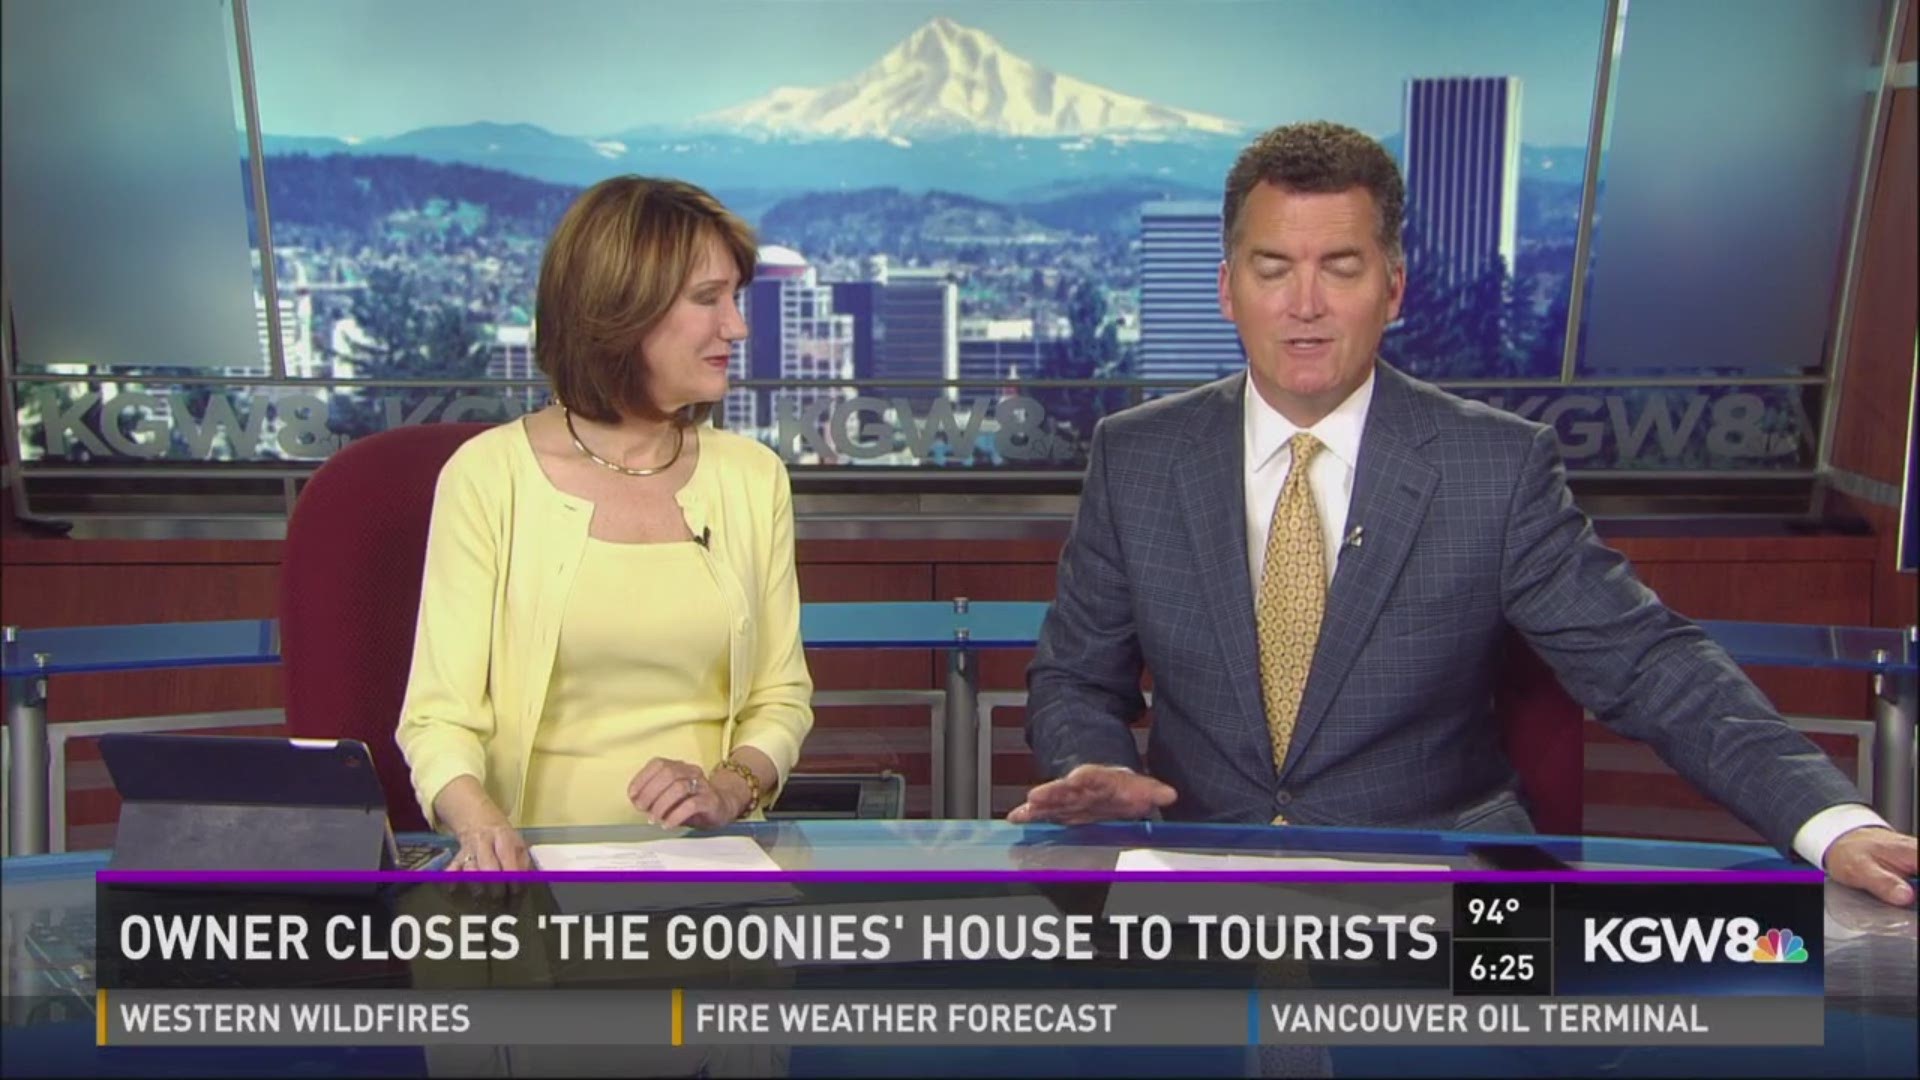 Owner closes 'The Goonies' house to tourists